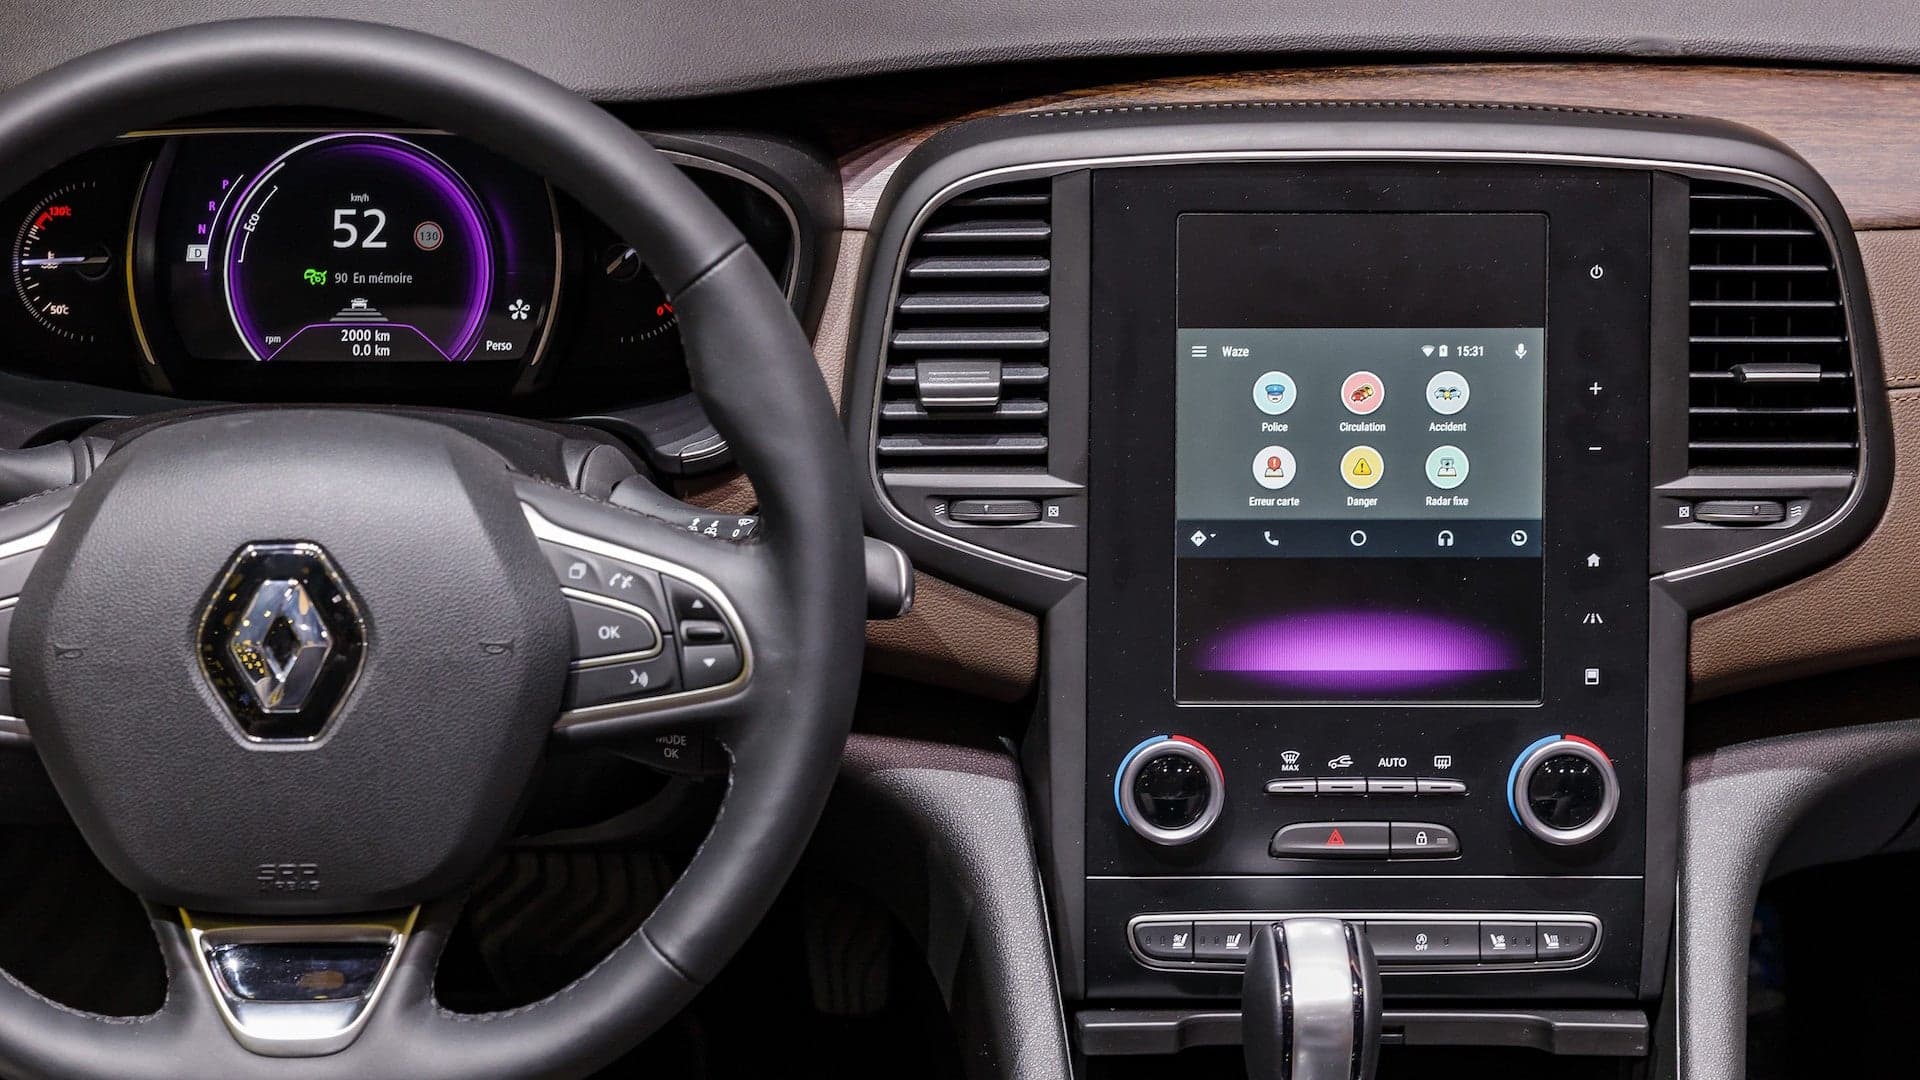 Is Renault Looking to Build Waze Directly Into Cars?